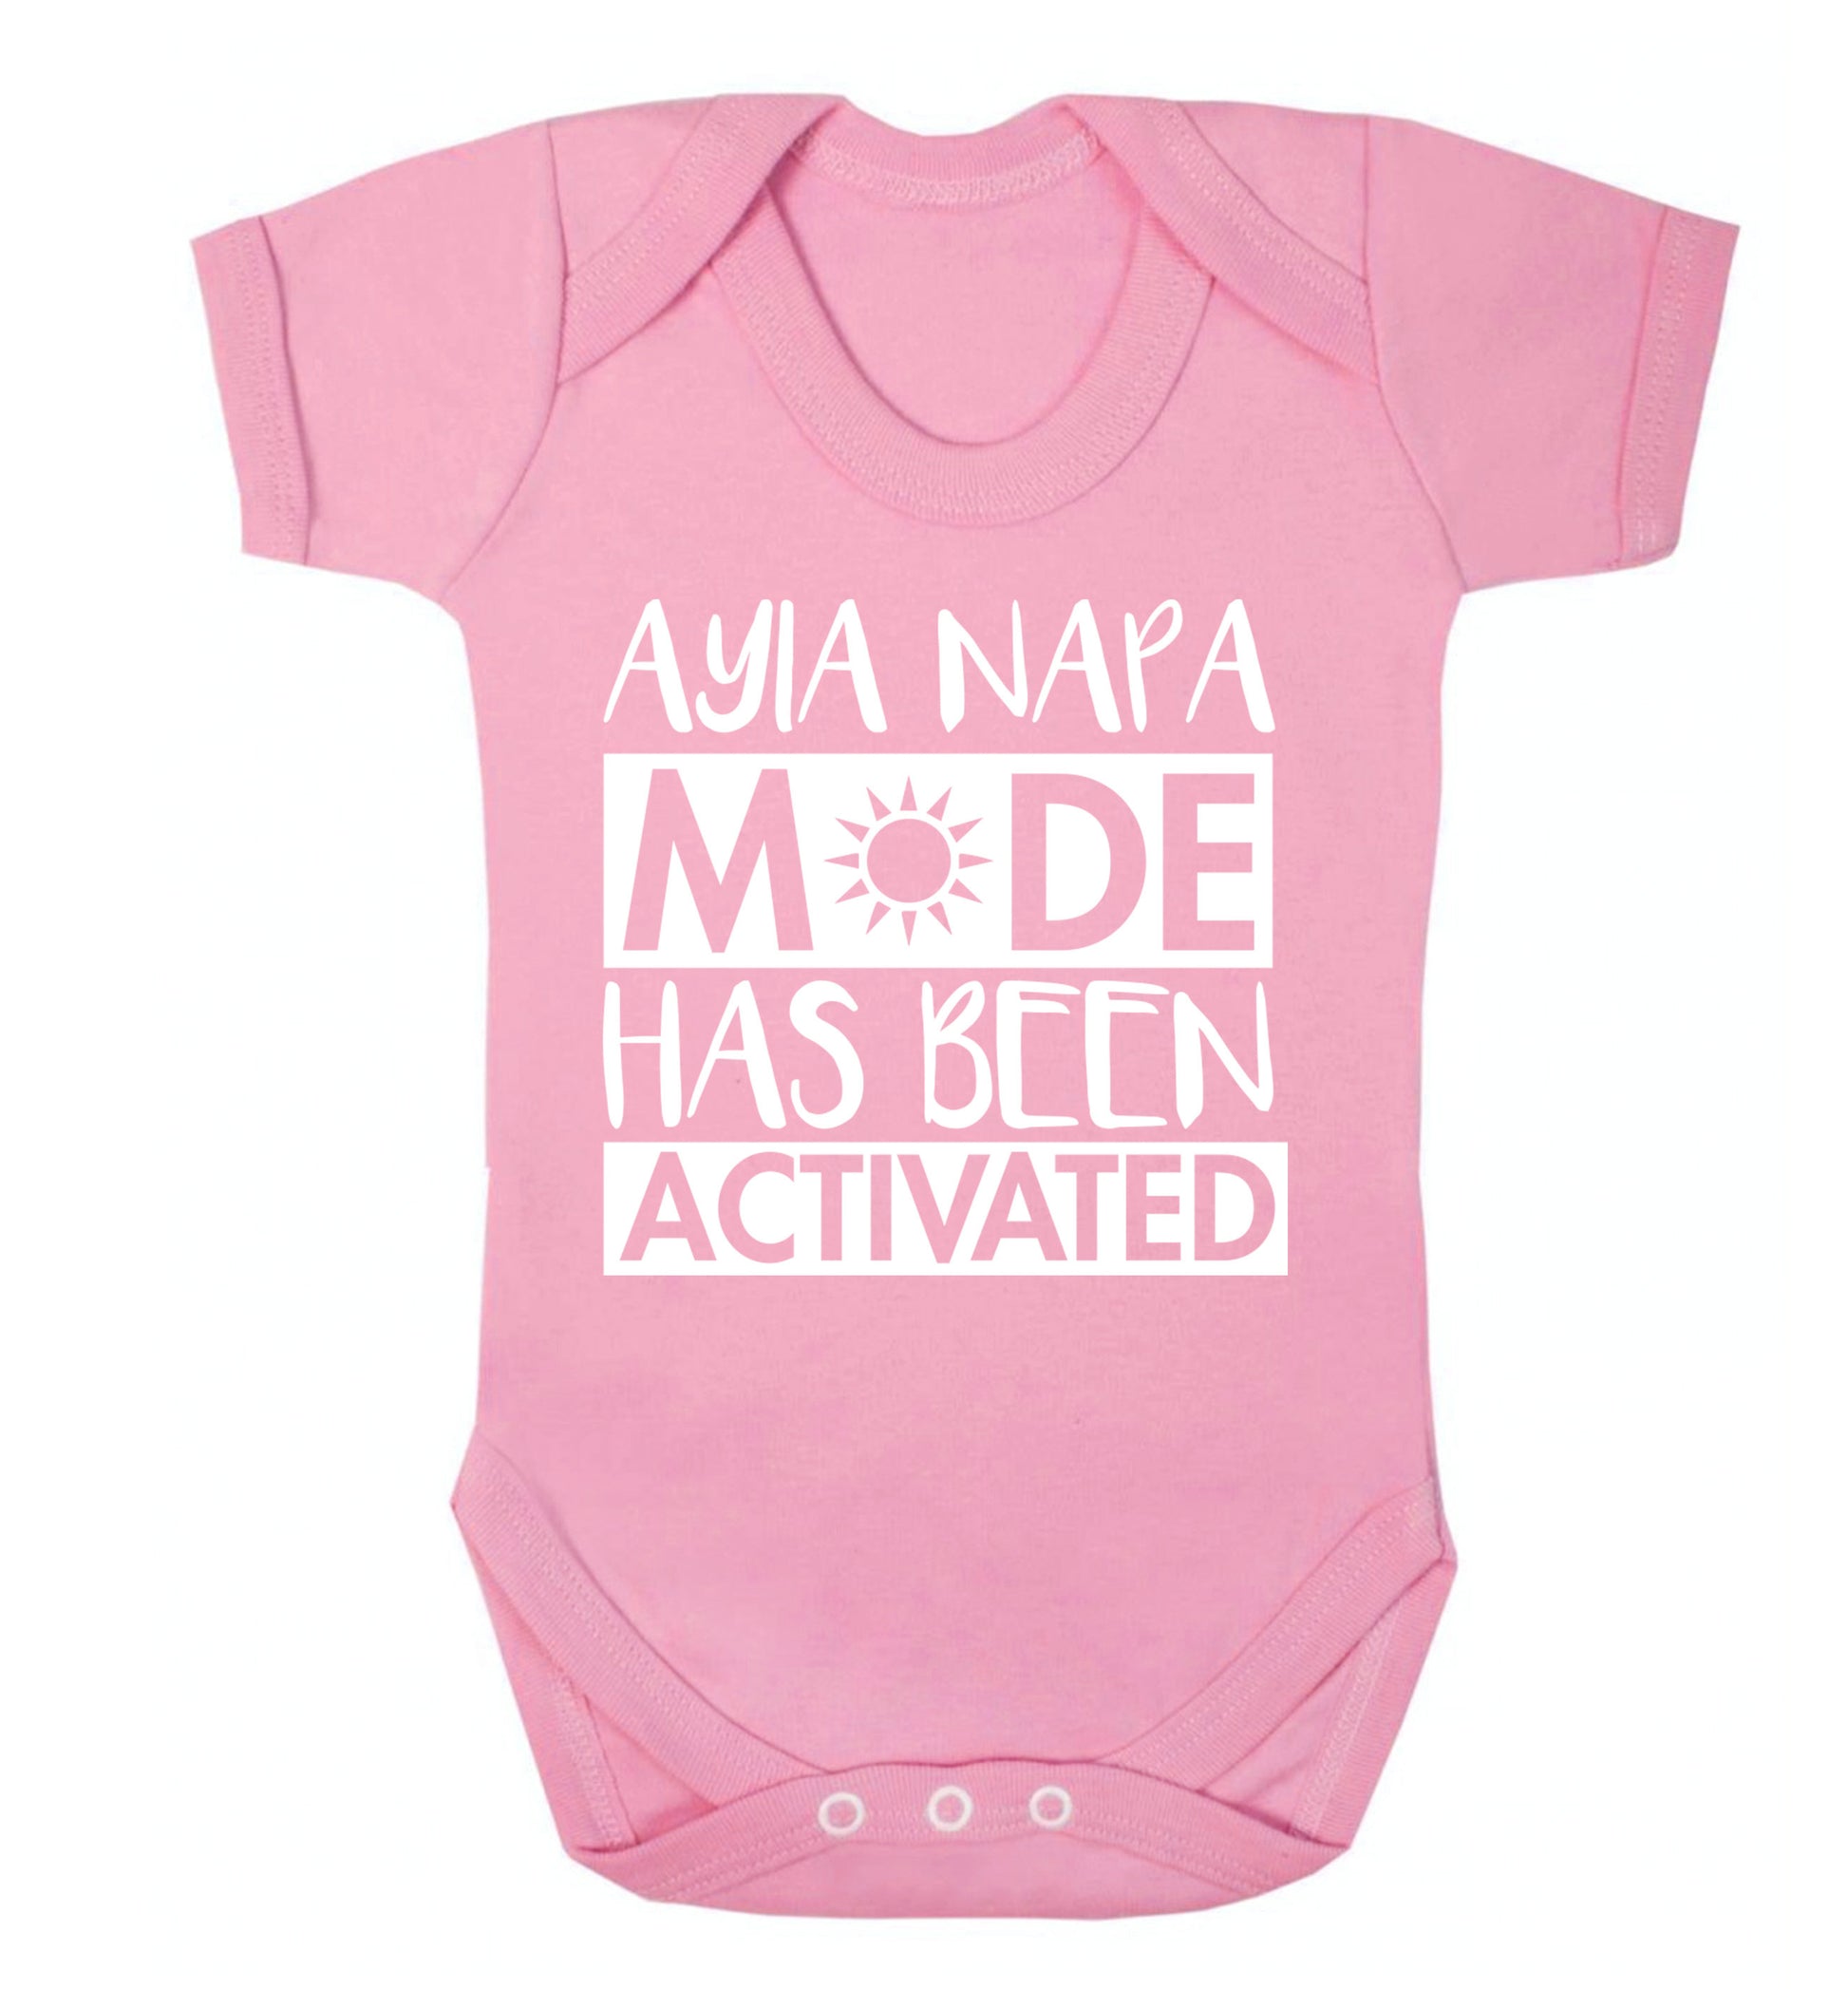 Aiya Napa mode has been activated Baby Vest pale pink 18-24 months